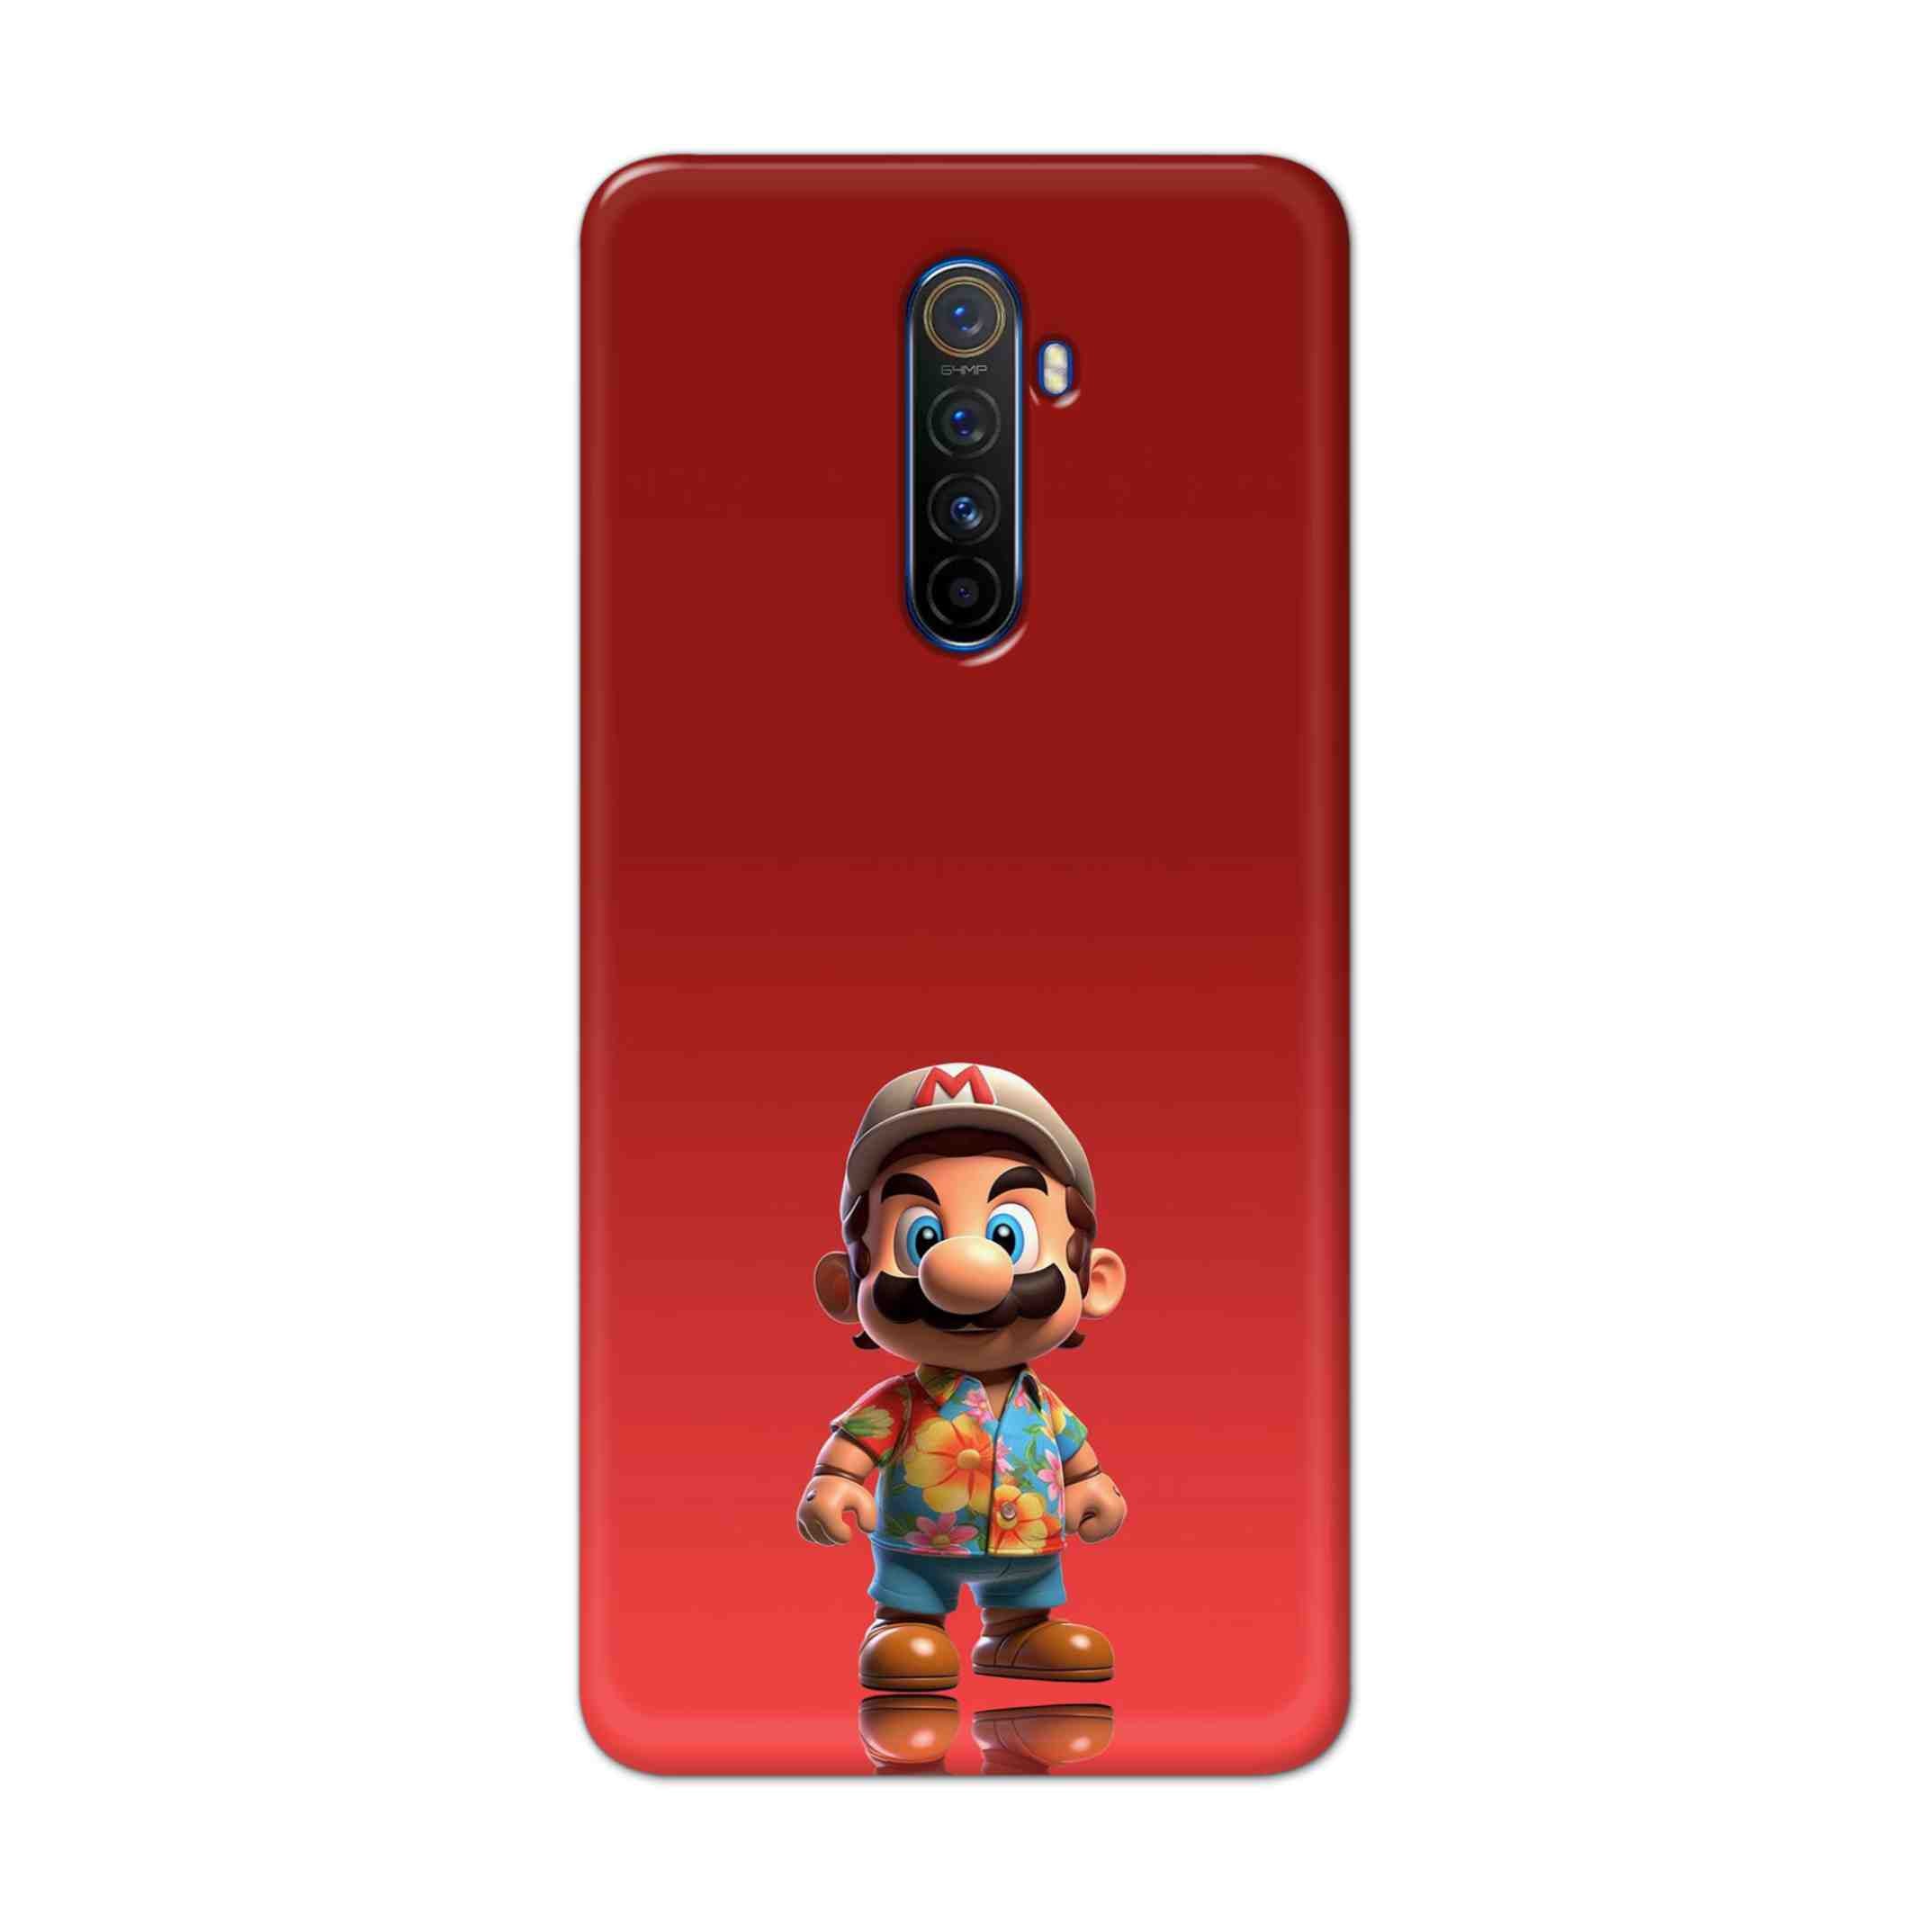 Buy Mario Hard Back Mobile Phone Case Cover For Realme X2 Pro Online